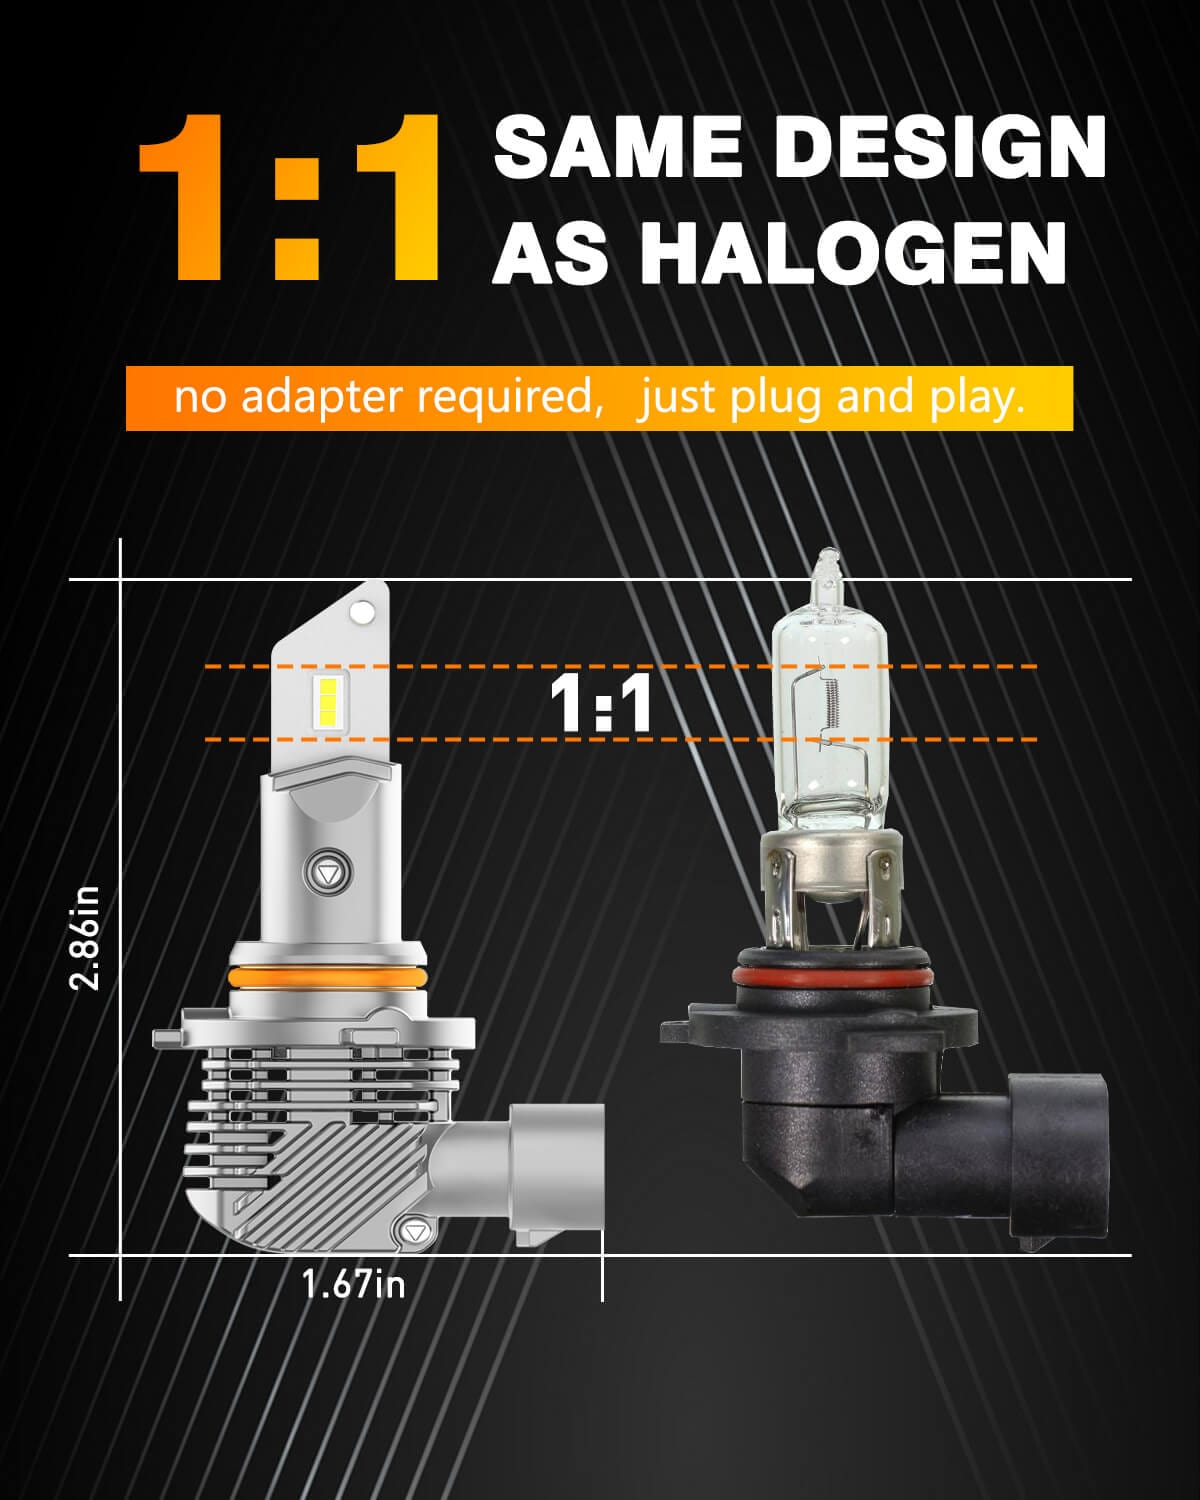 LED bulb-set HB3 (6500K) to converting from halogen to LED